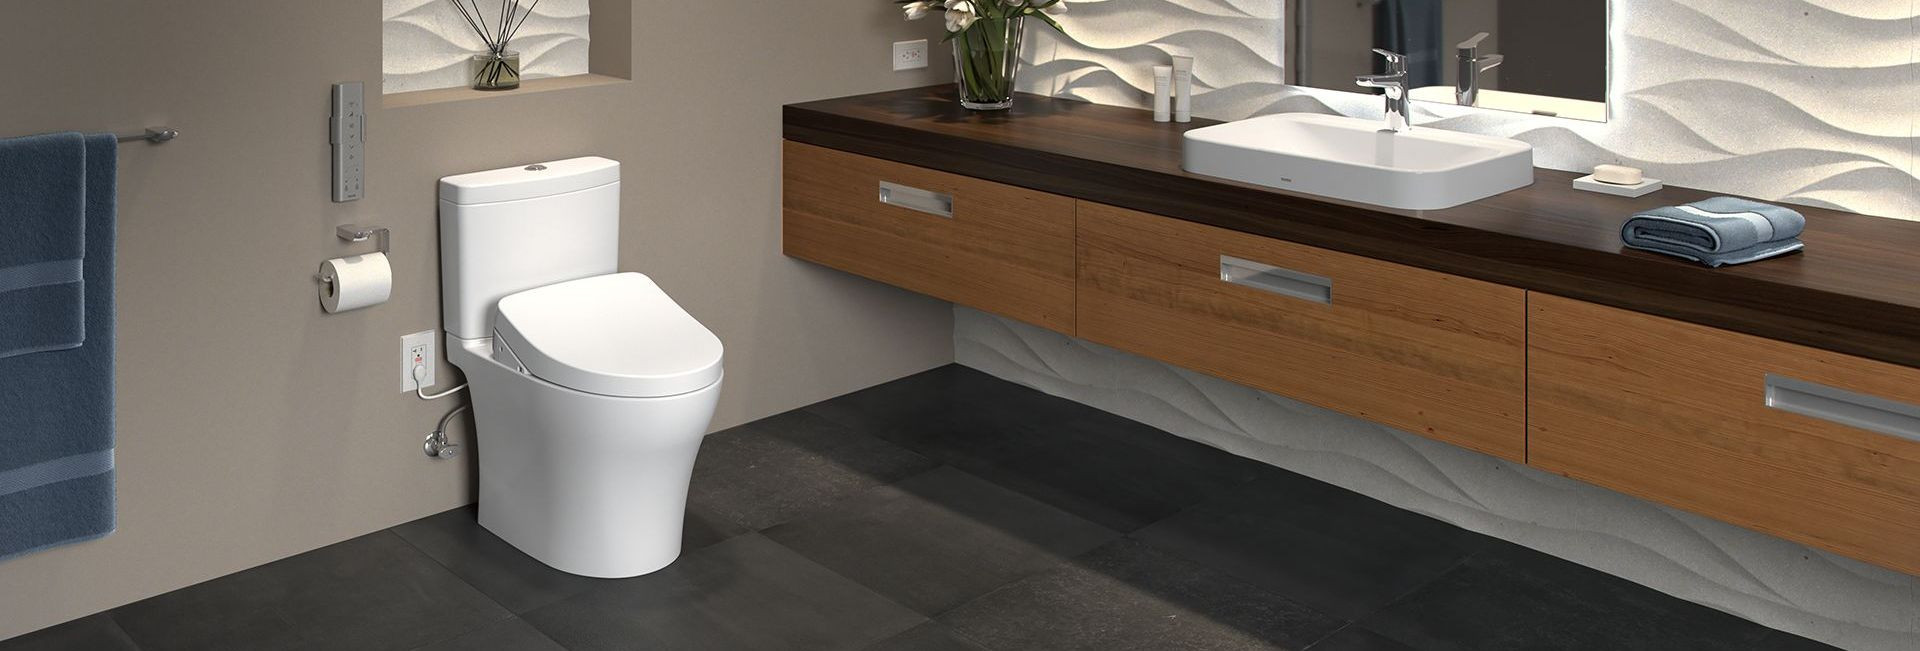 Best Toilets For Small Bathroom
 8 Best Toilets for Small Bathroom Dec 2019 Reviews